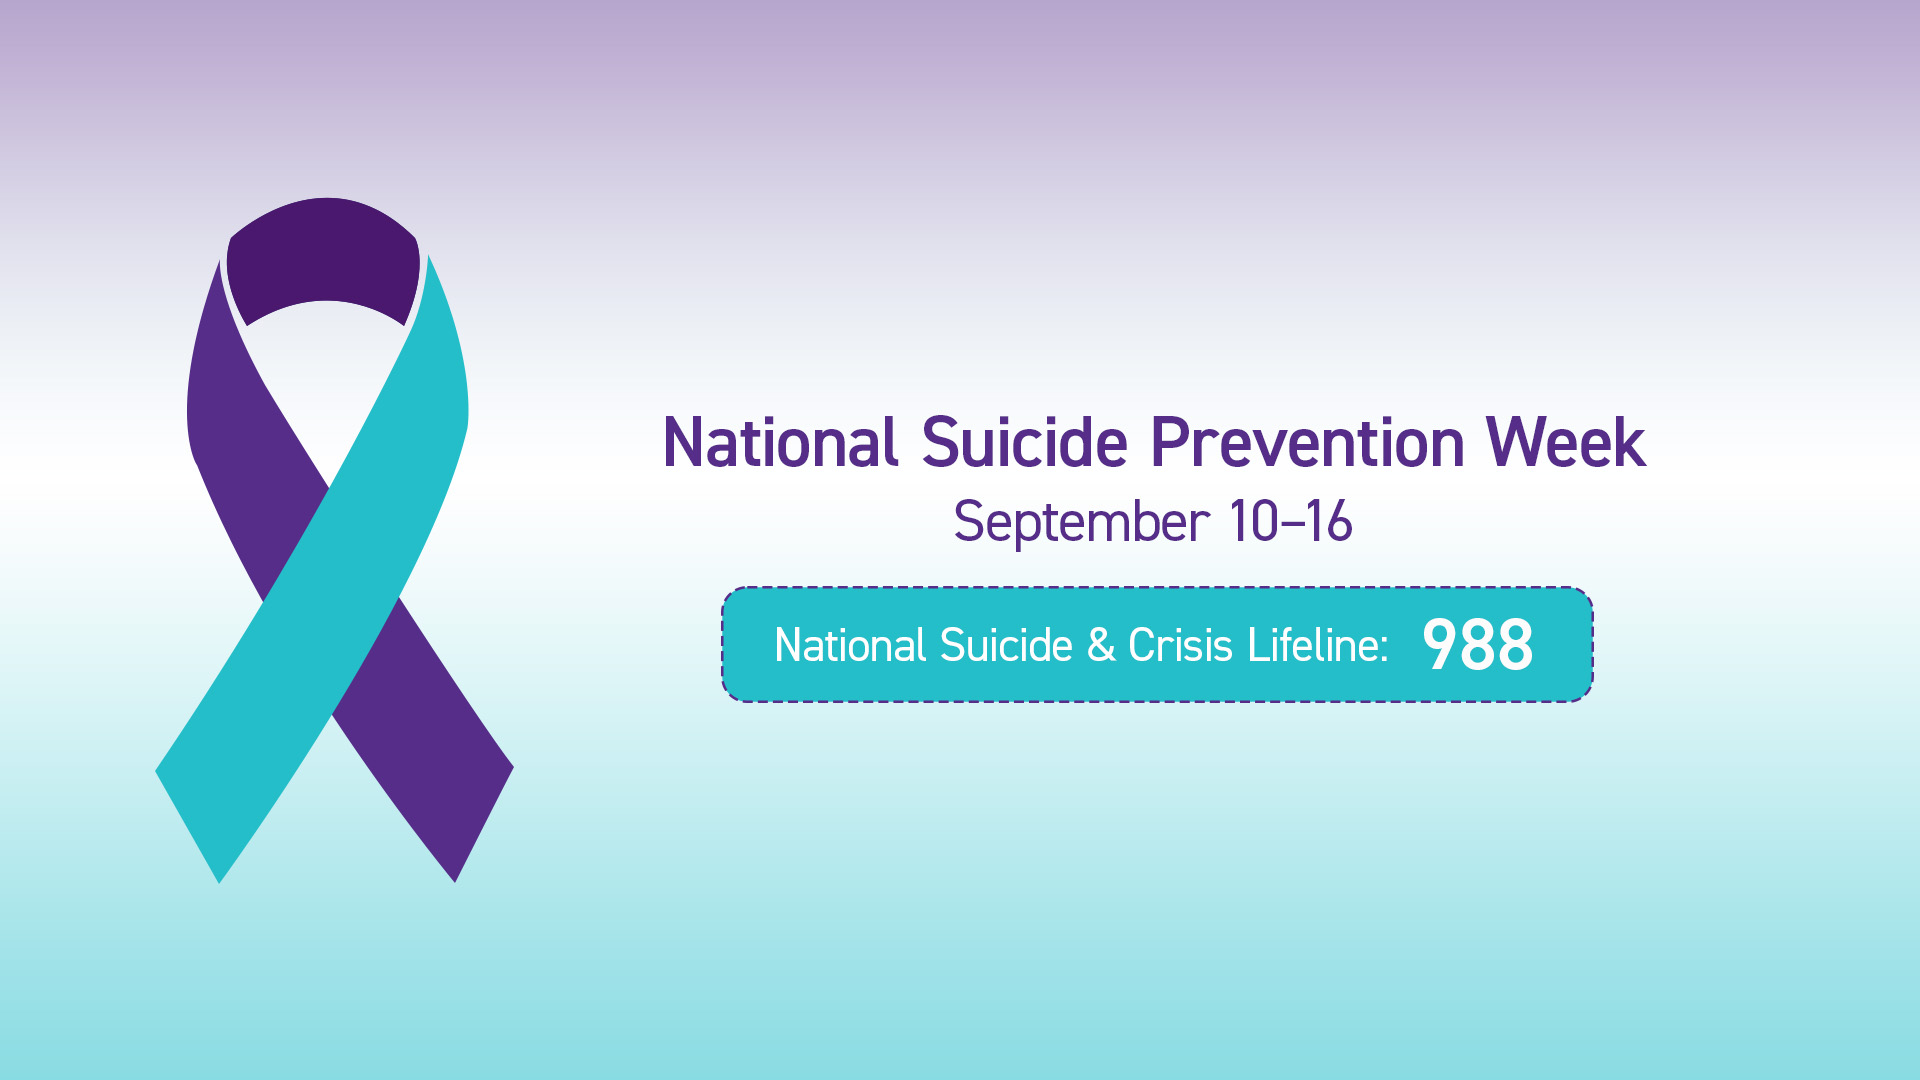 Purple, white, and teal gradient background. A purple and teal ribbon on the left. In purple san serif letters read National Suicide Prevention Week September 10–16. Below in with letters in a teal box reads National Suicide & Crisis Lifeline: 988